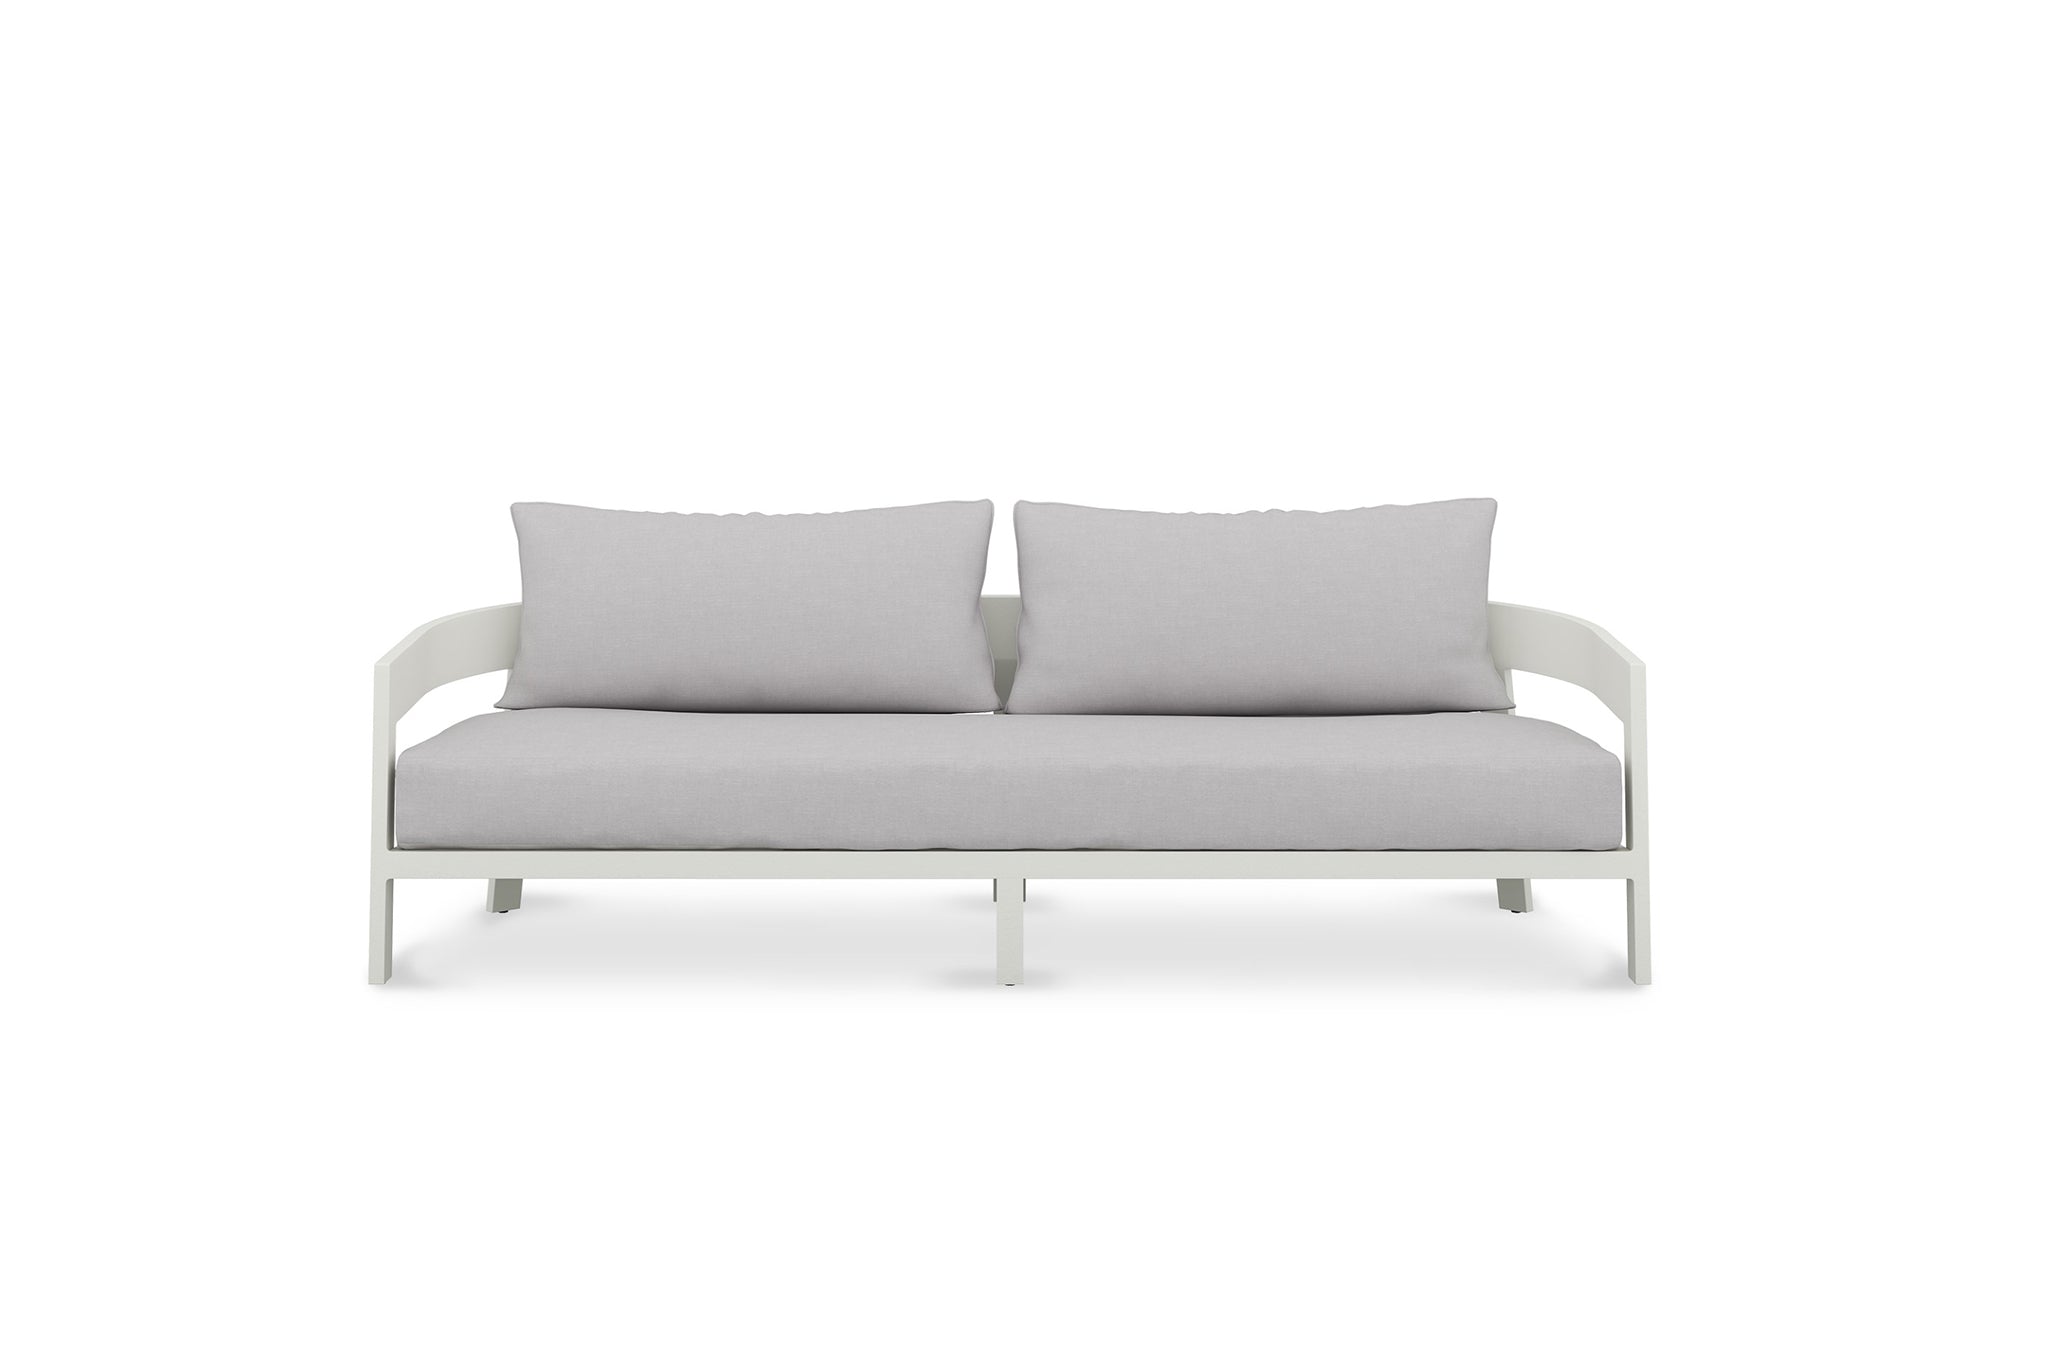 Queenscliff Outdoor Sofa – 3 Seater – White Powder Coated Frame